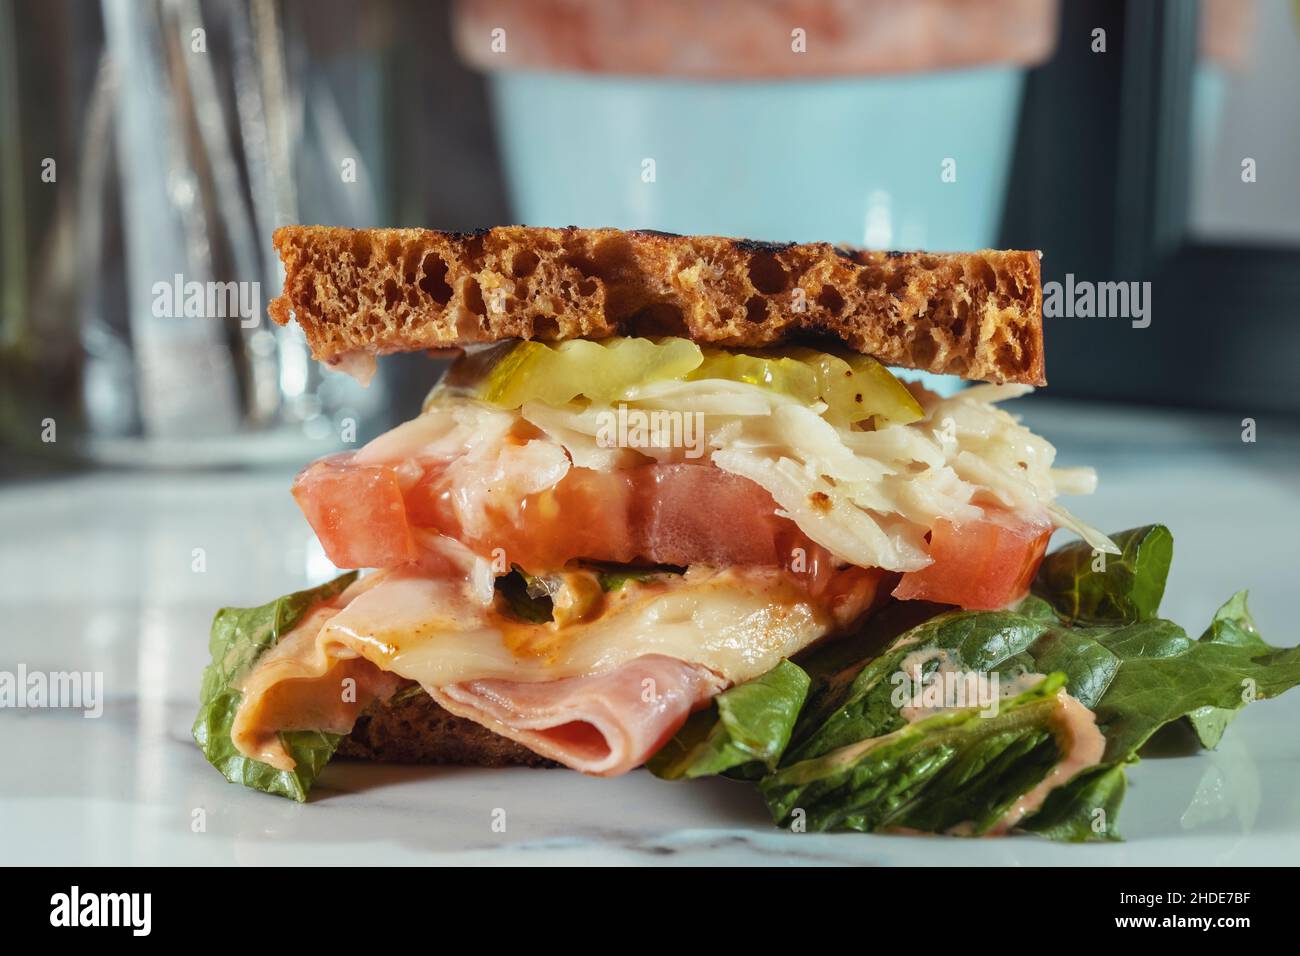 Toasted reuben ham sandwich with cole slaw and thousand island dressing Stock Photo